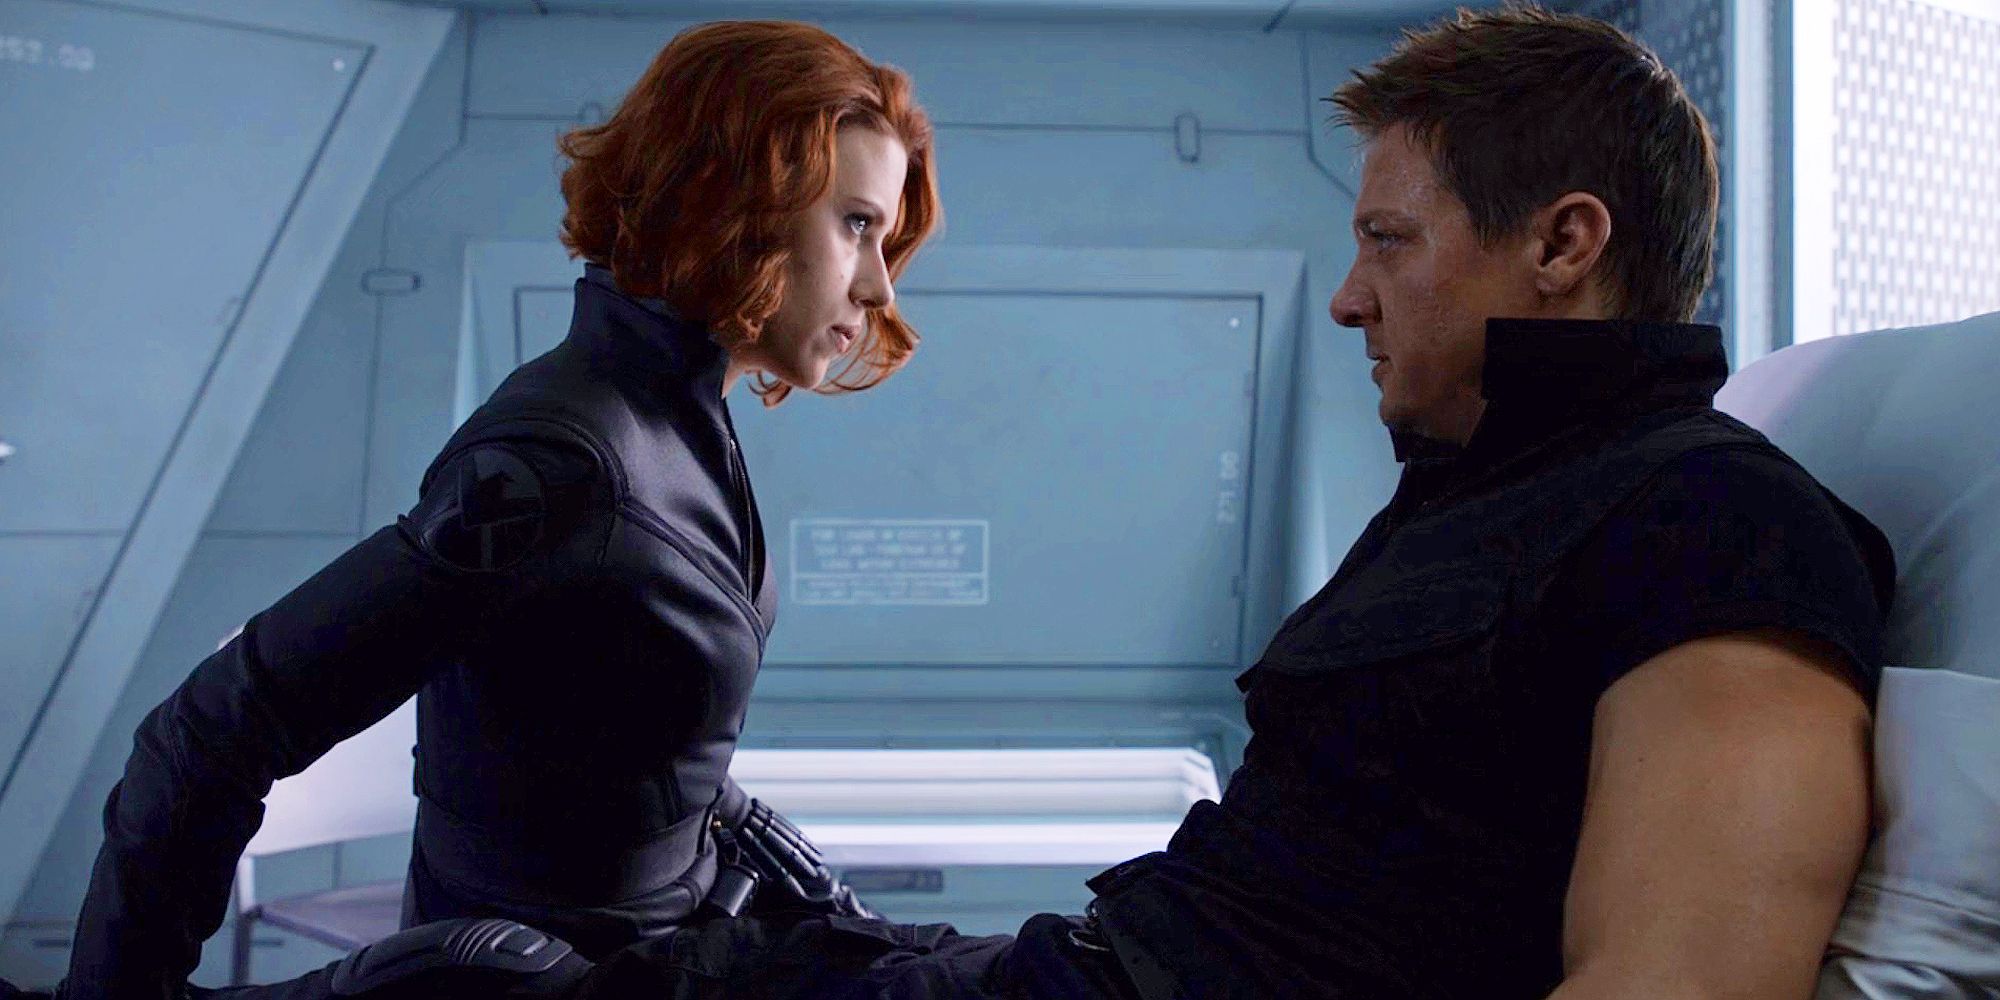 Hawkeye and Black Widow in the Infirmary in The Avengers